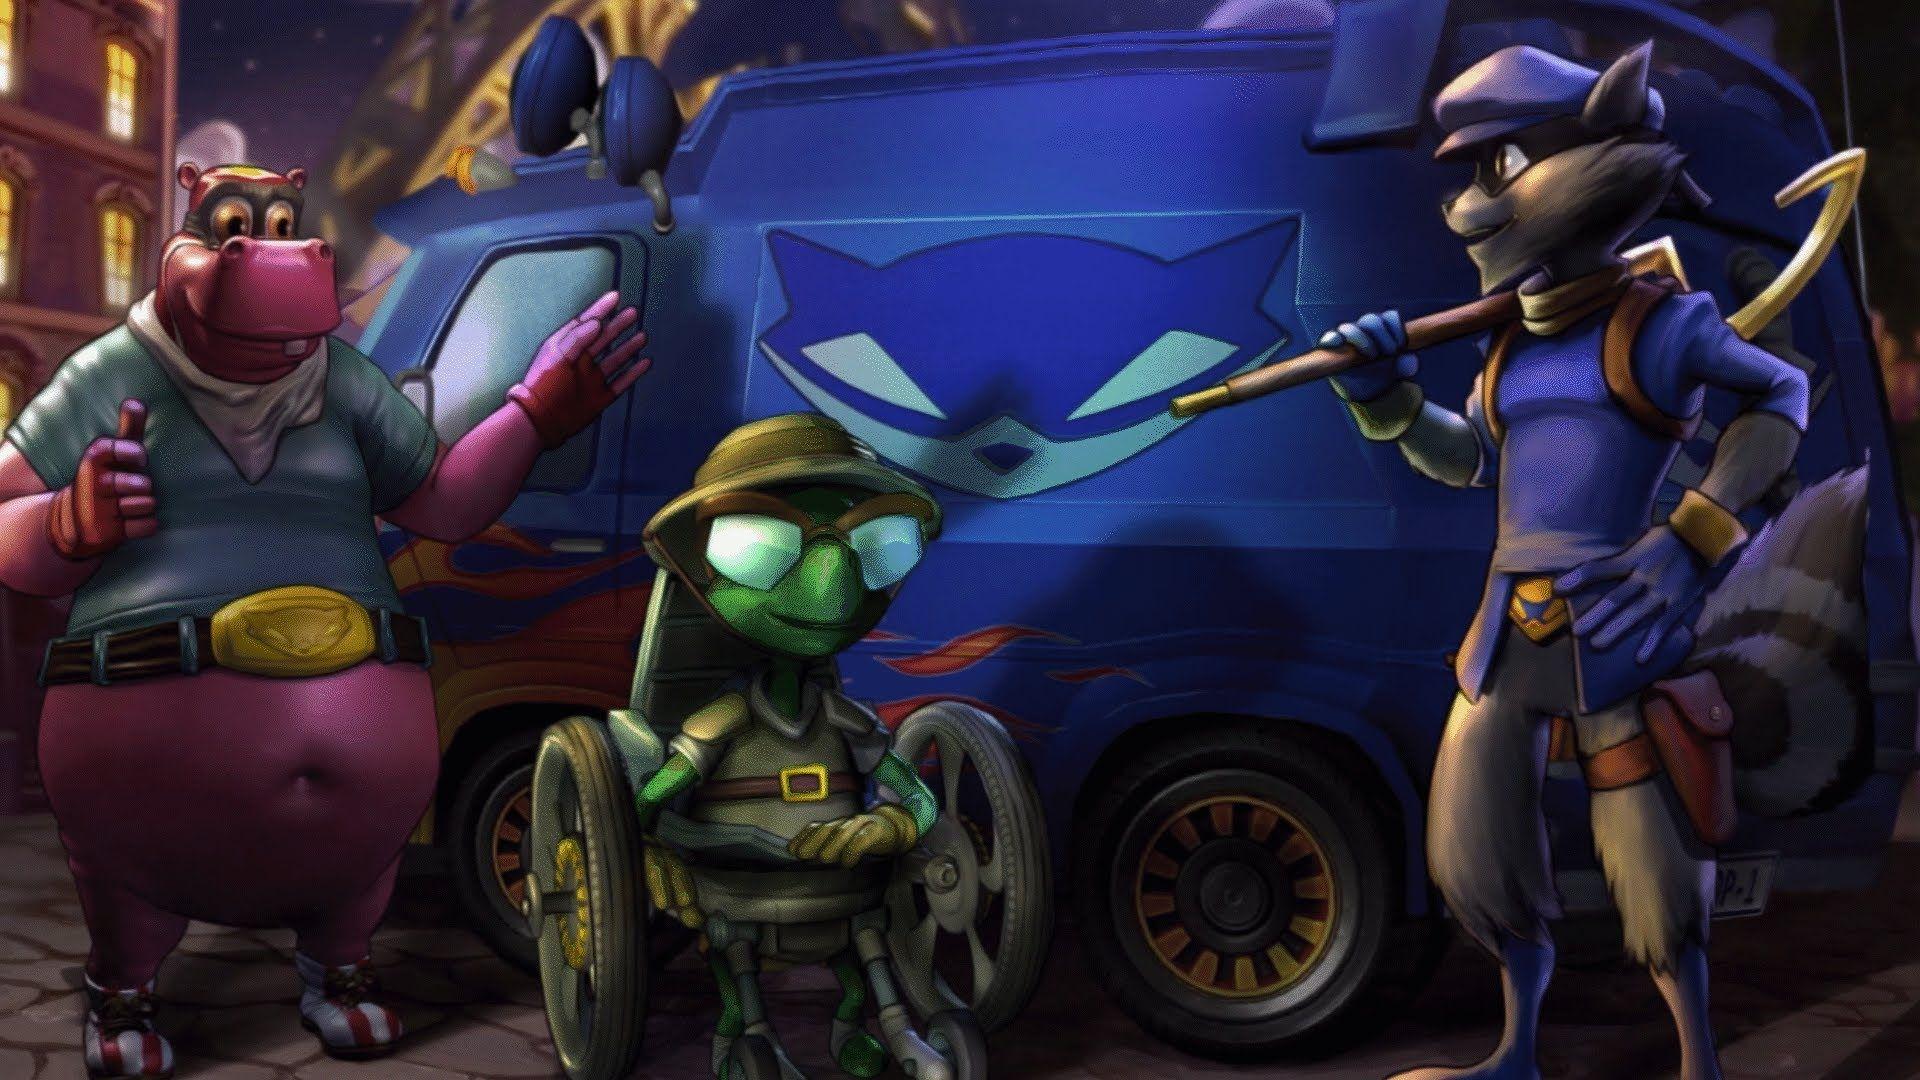 Game Sly Cooper Image Download